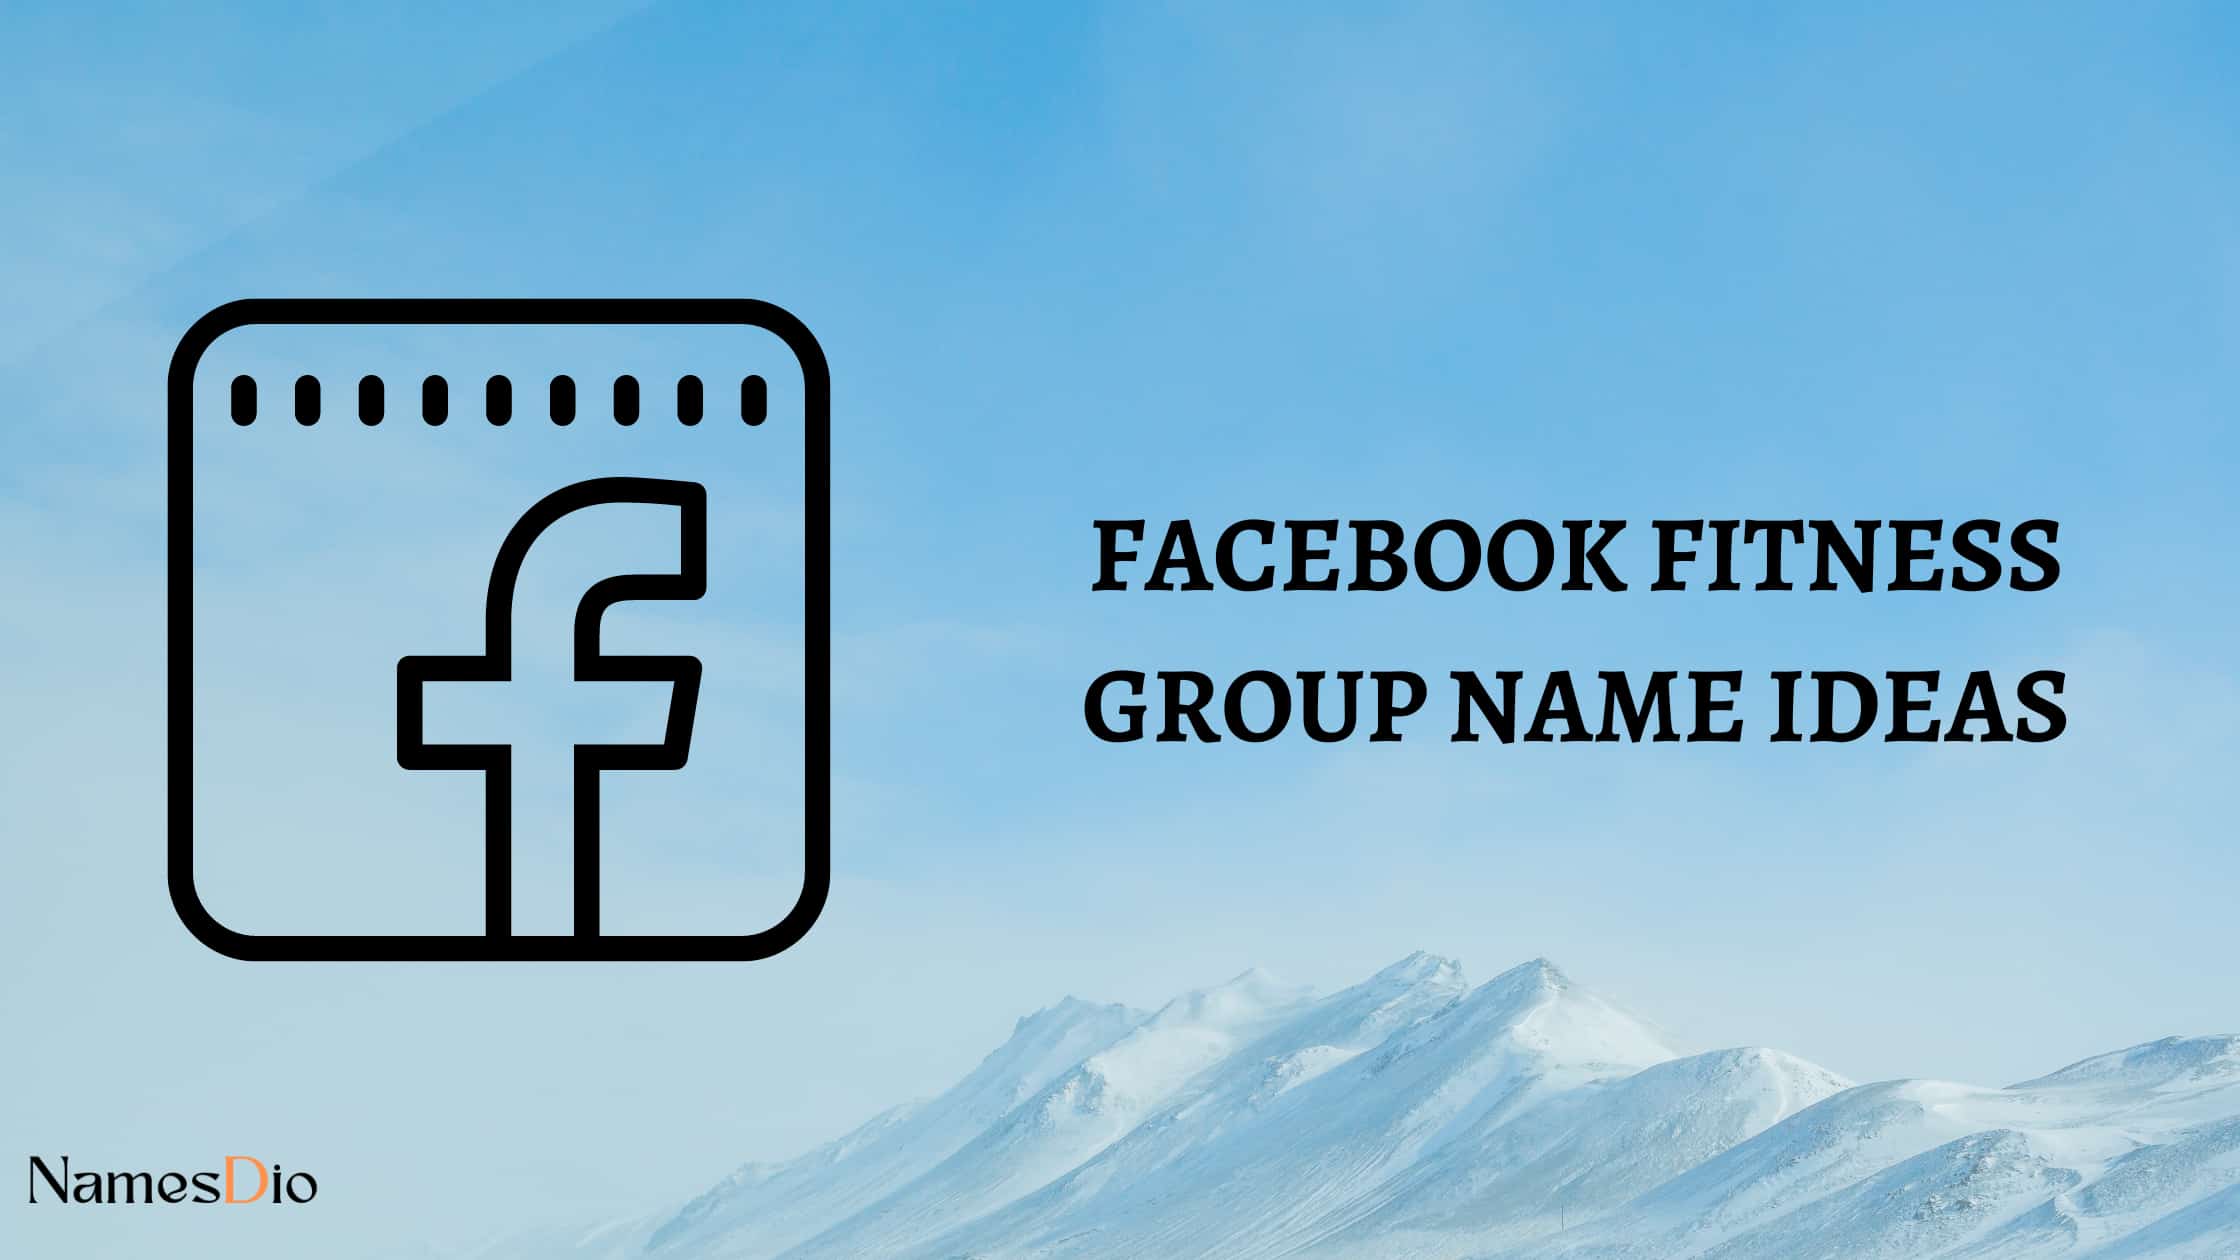 Facebook-Fitness-Group-Name-Ideas